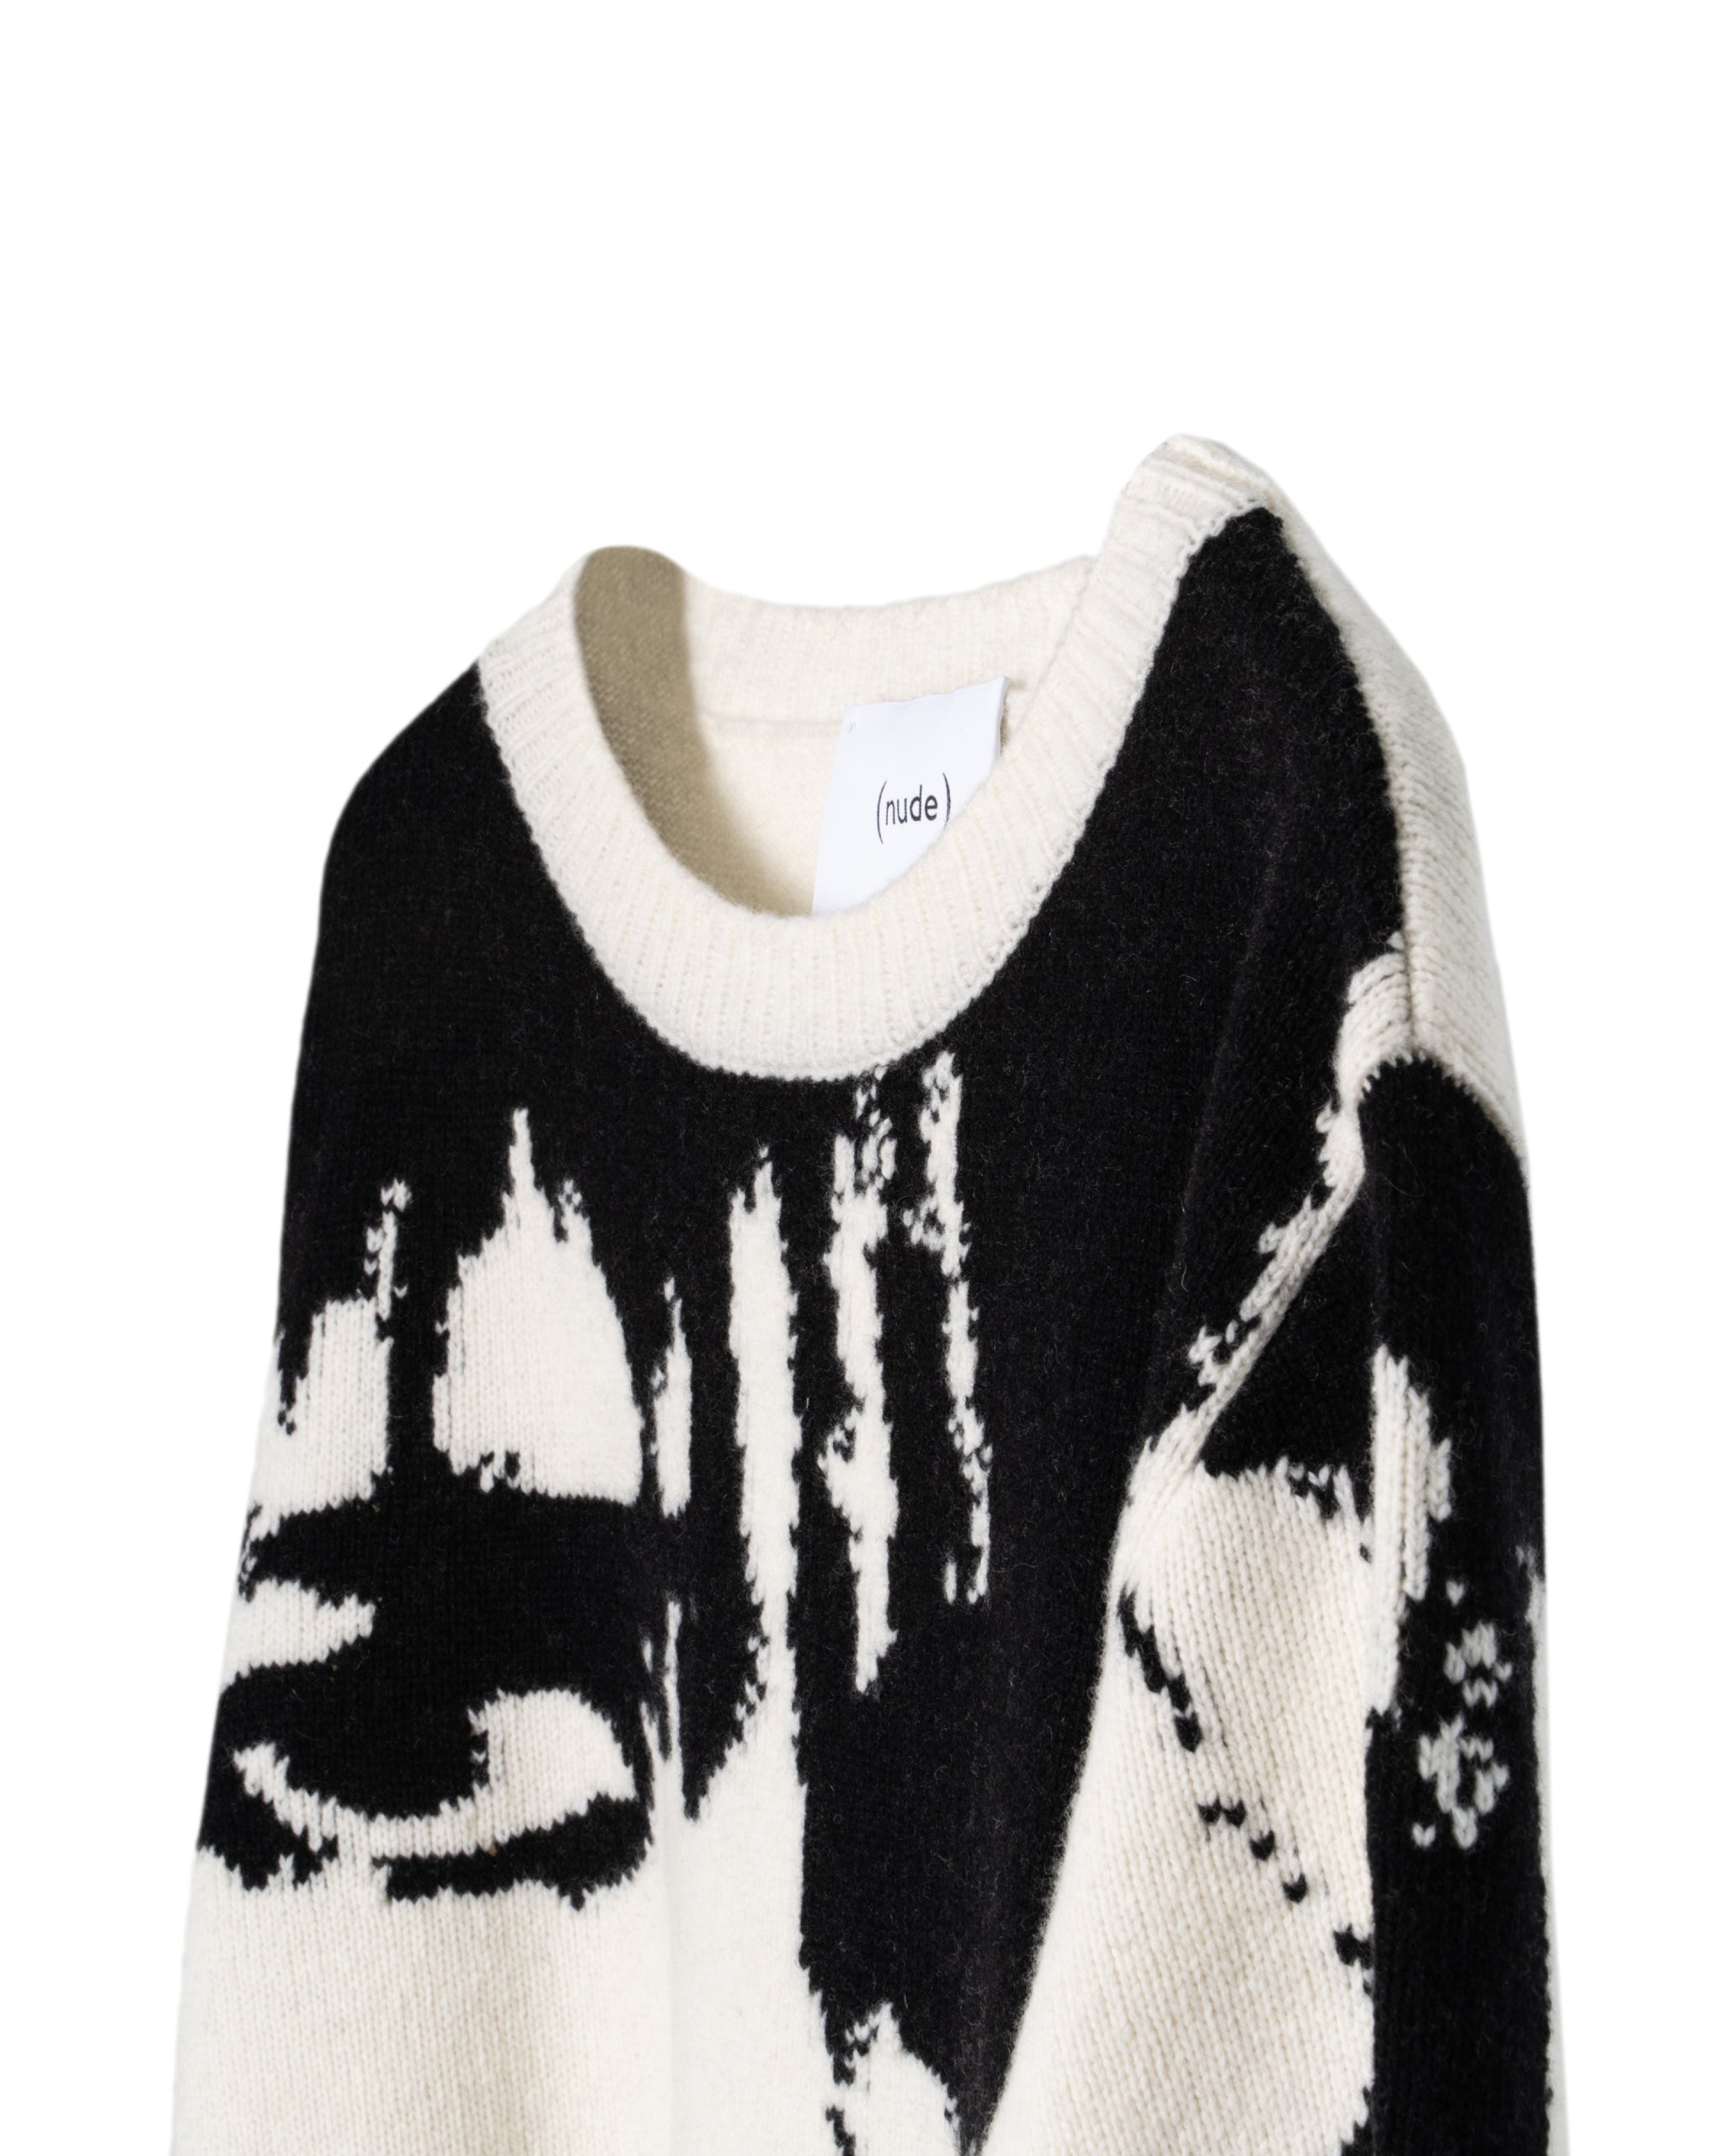 WOOL BLEND ALICE COOPER FACE CREW NECK SWEATER